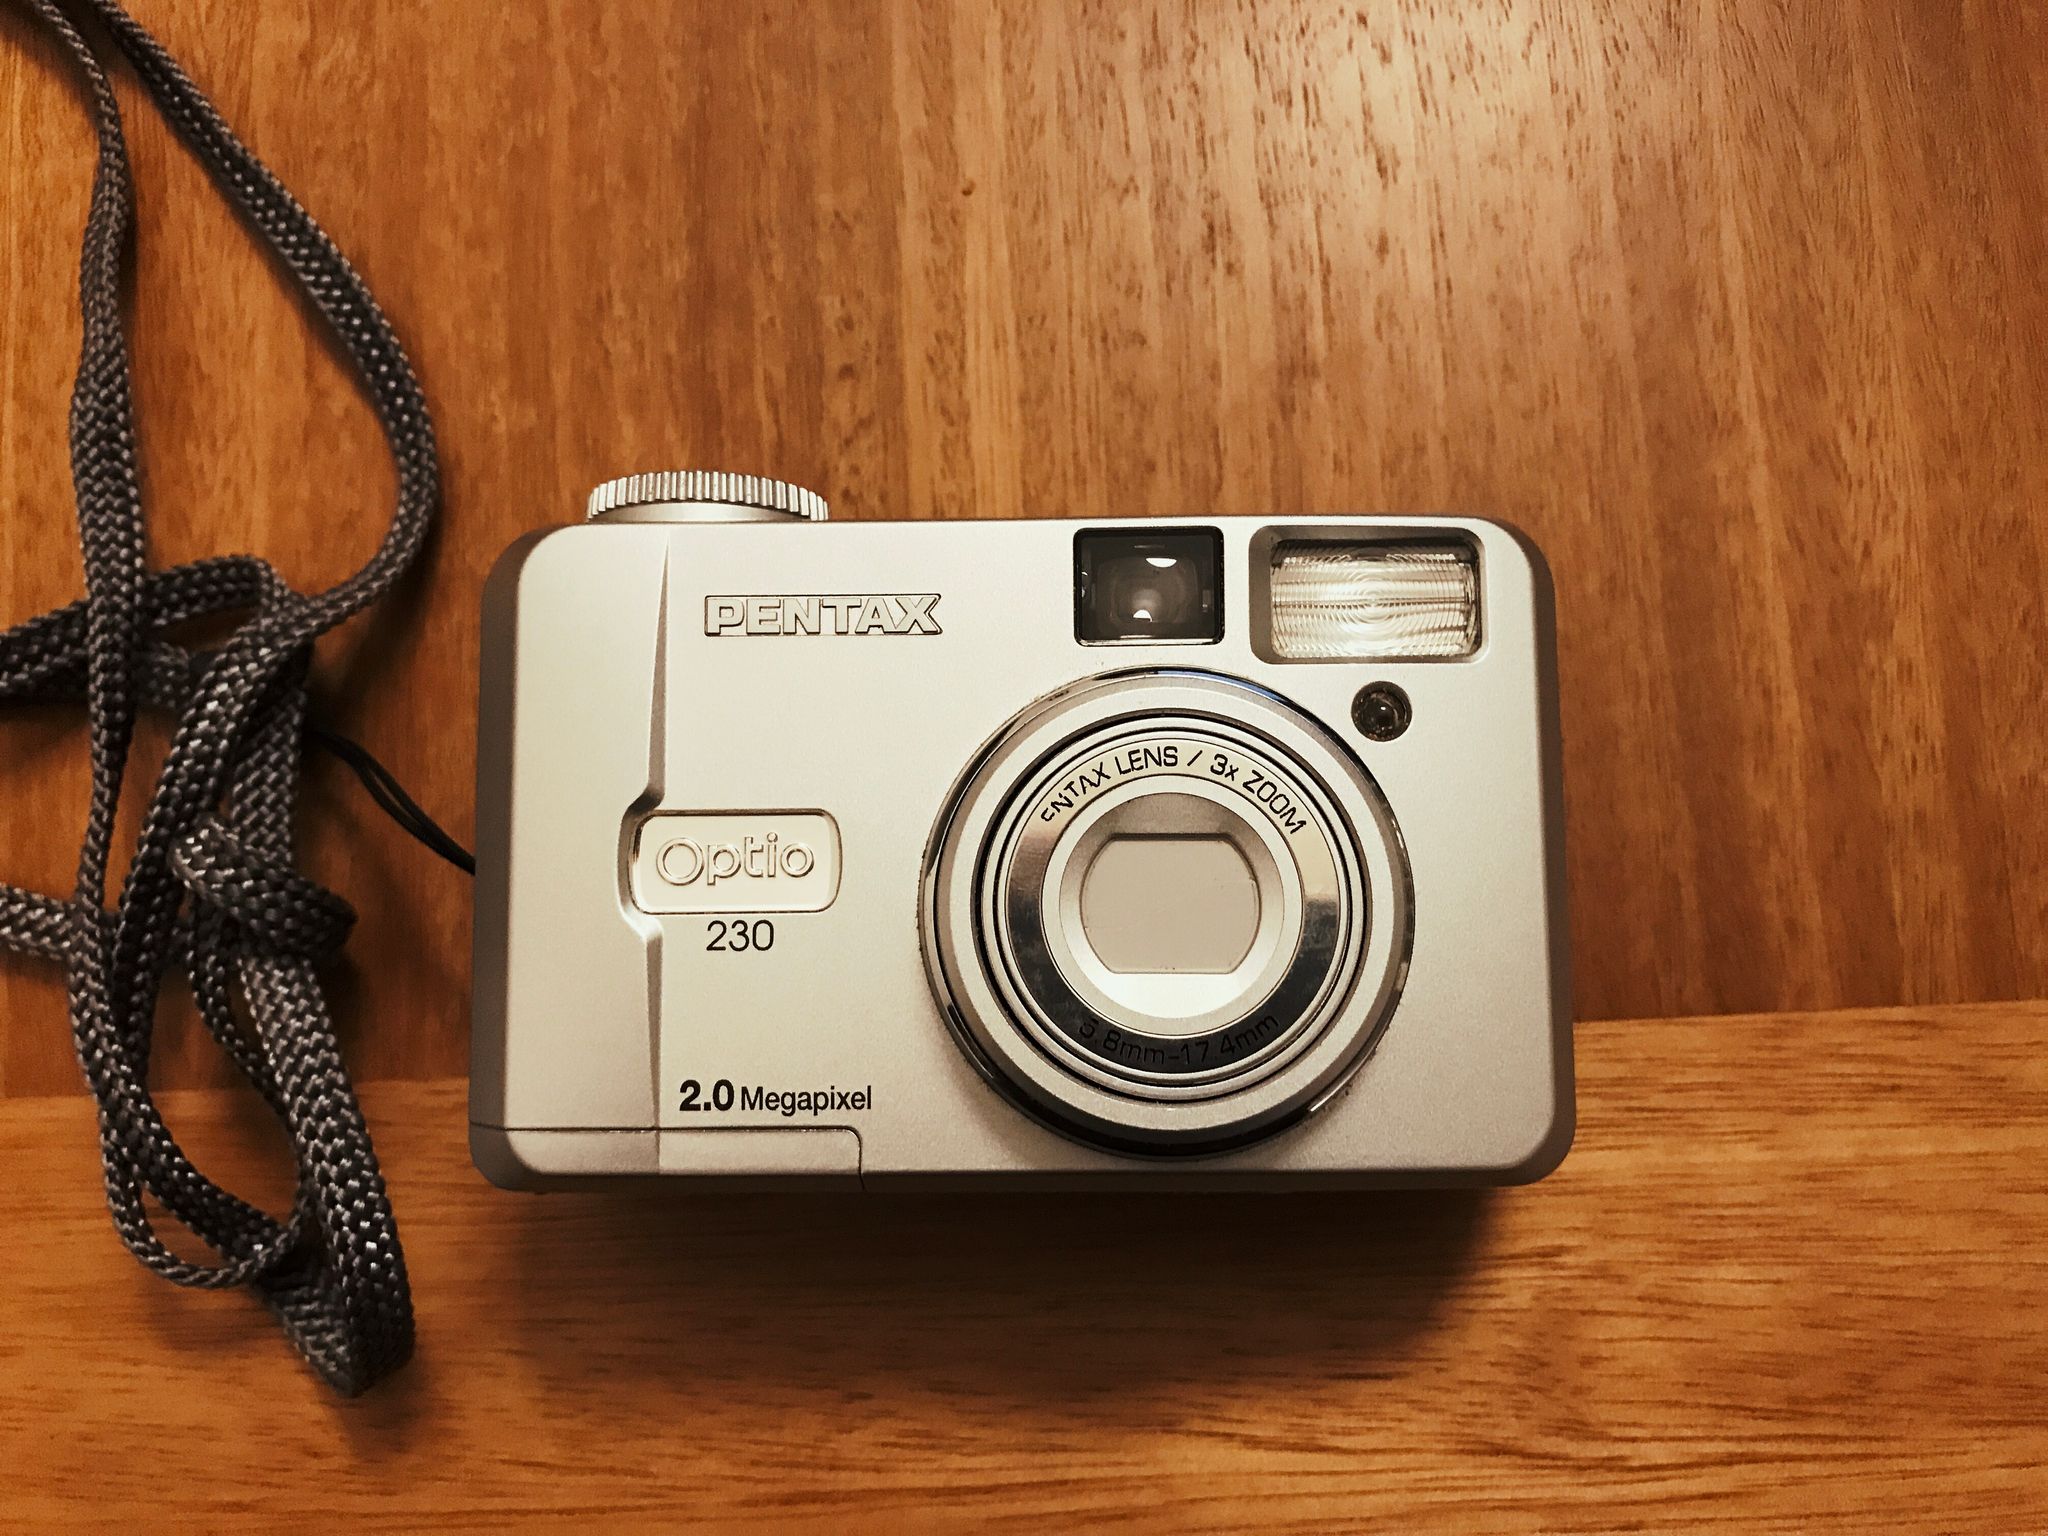 A photo of a Pentax Optio 230 point-and-shoot camera from probably about 2002, with the words “2.0 MEGAPIXELS” emblazoned proudly on the front.